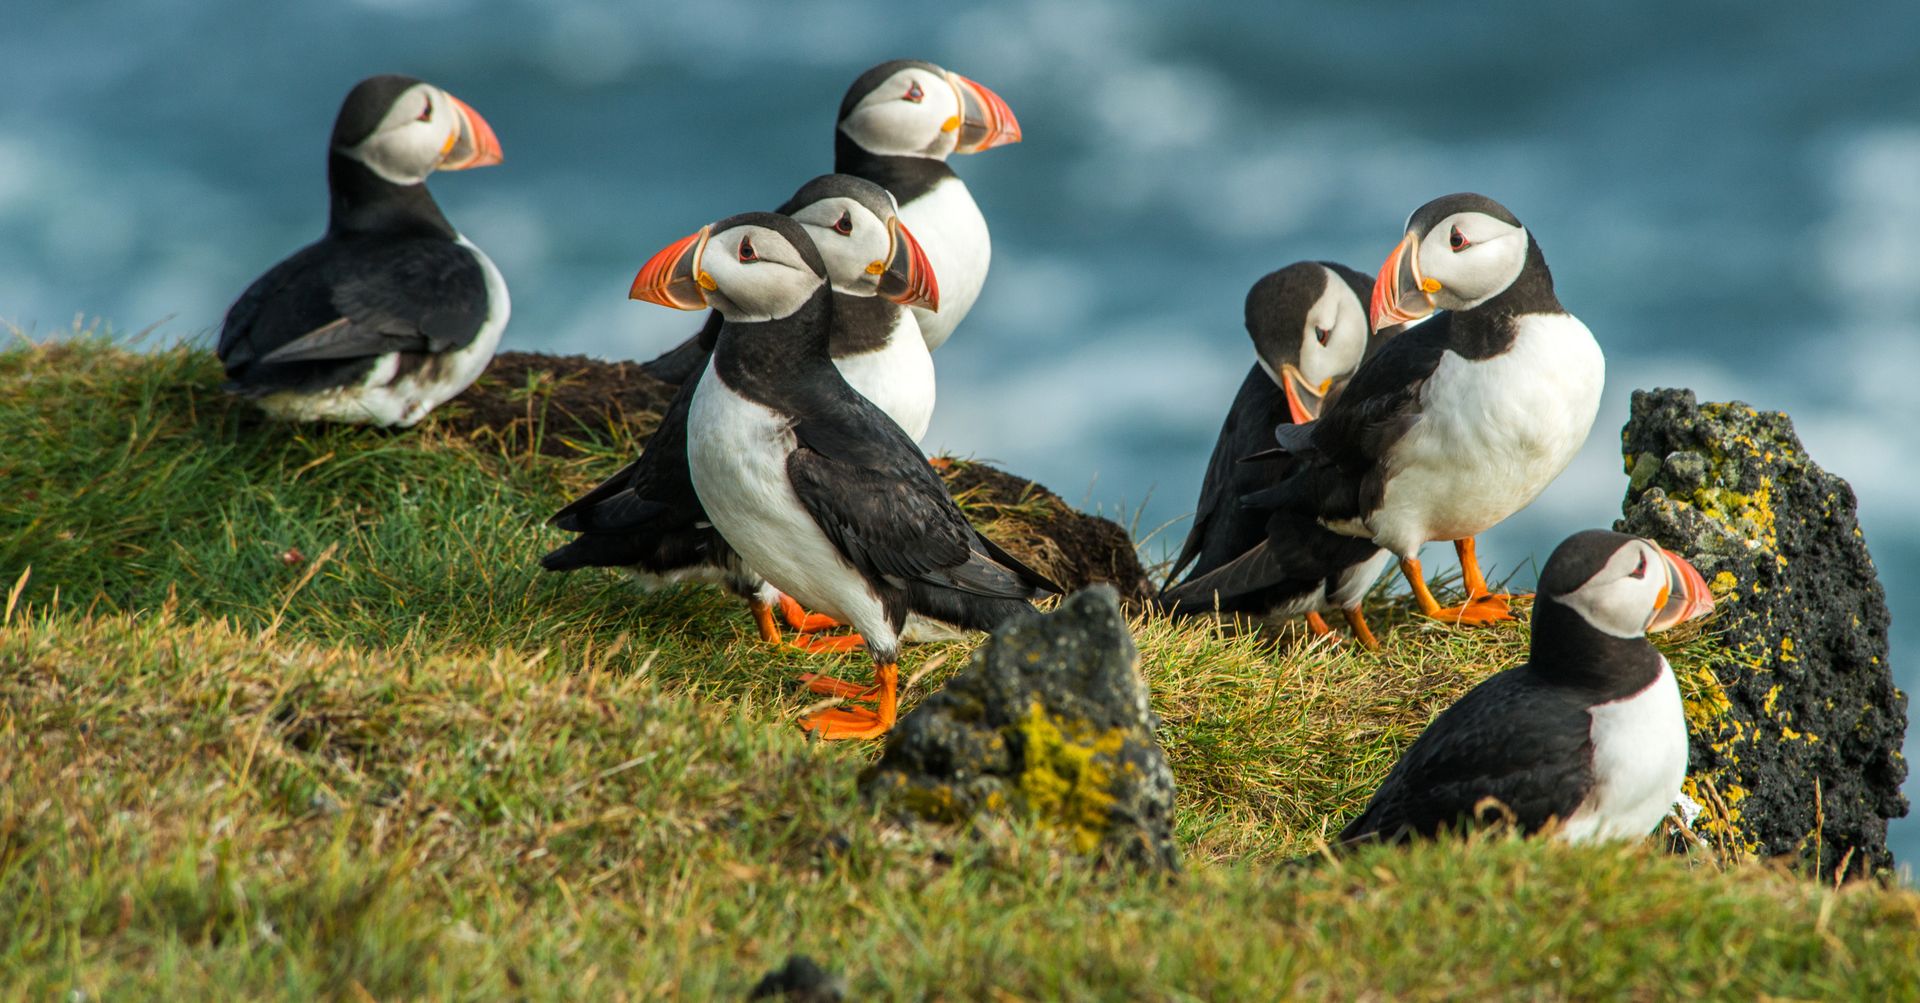 Group of Puffins in Iceland on a rock with the ocean in the background